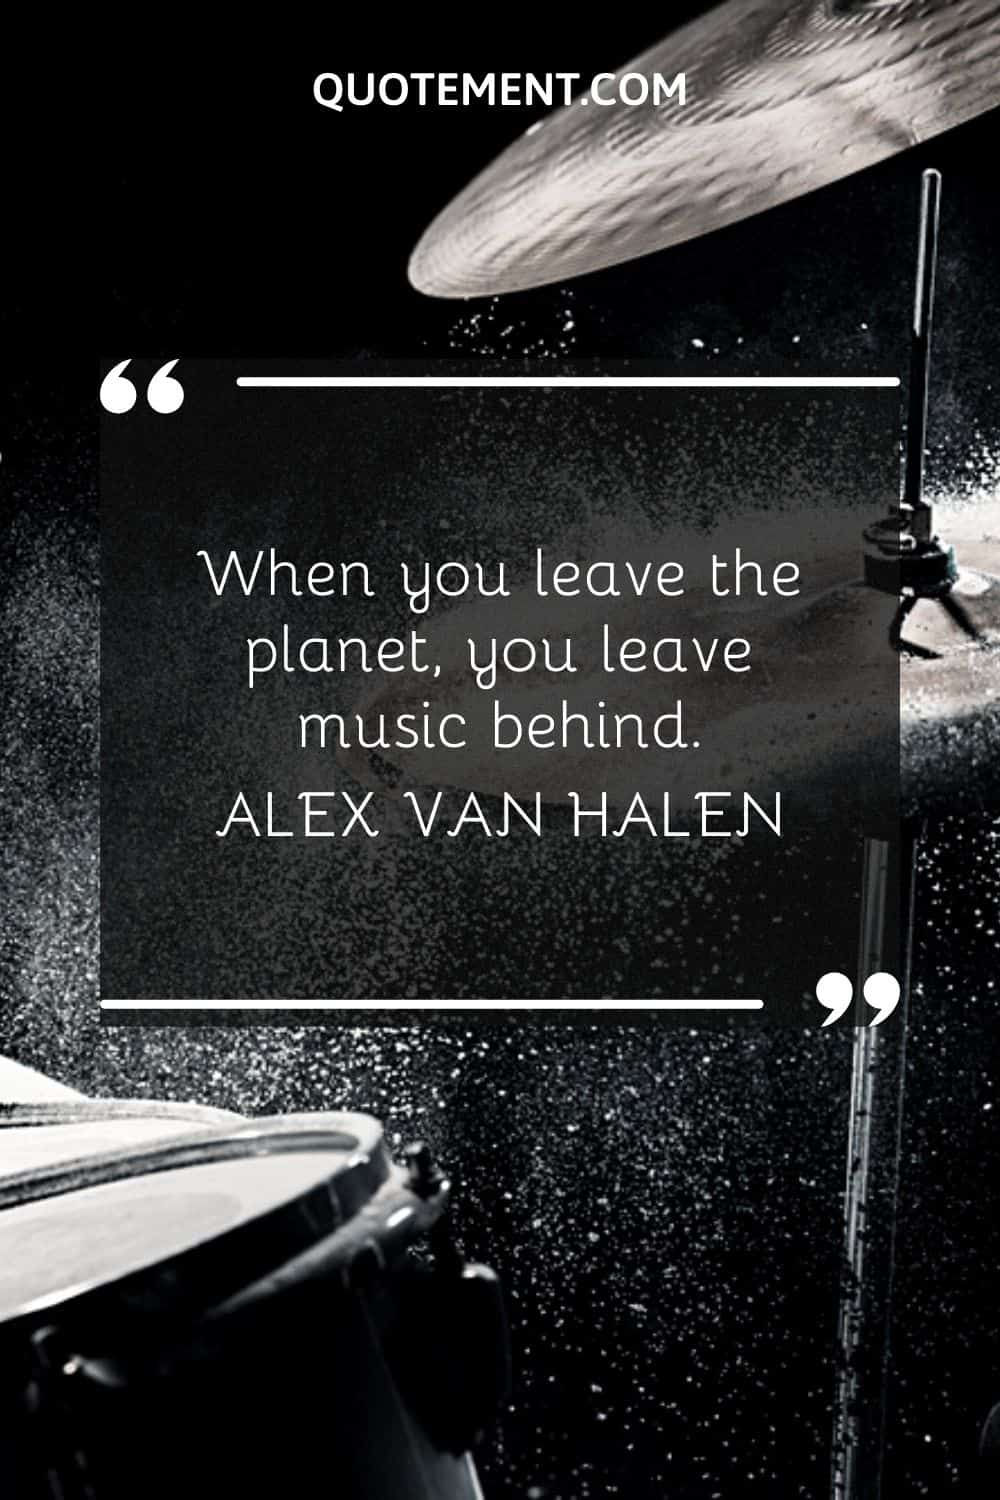 When you leave the planet, you leave music behind